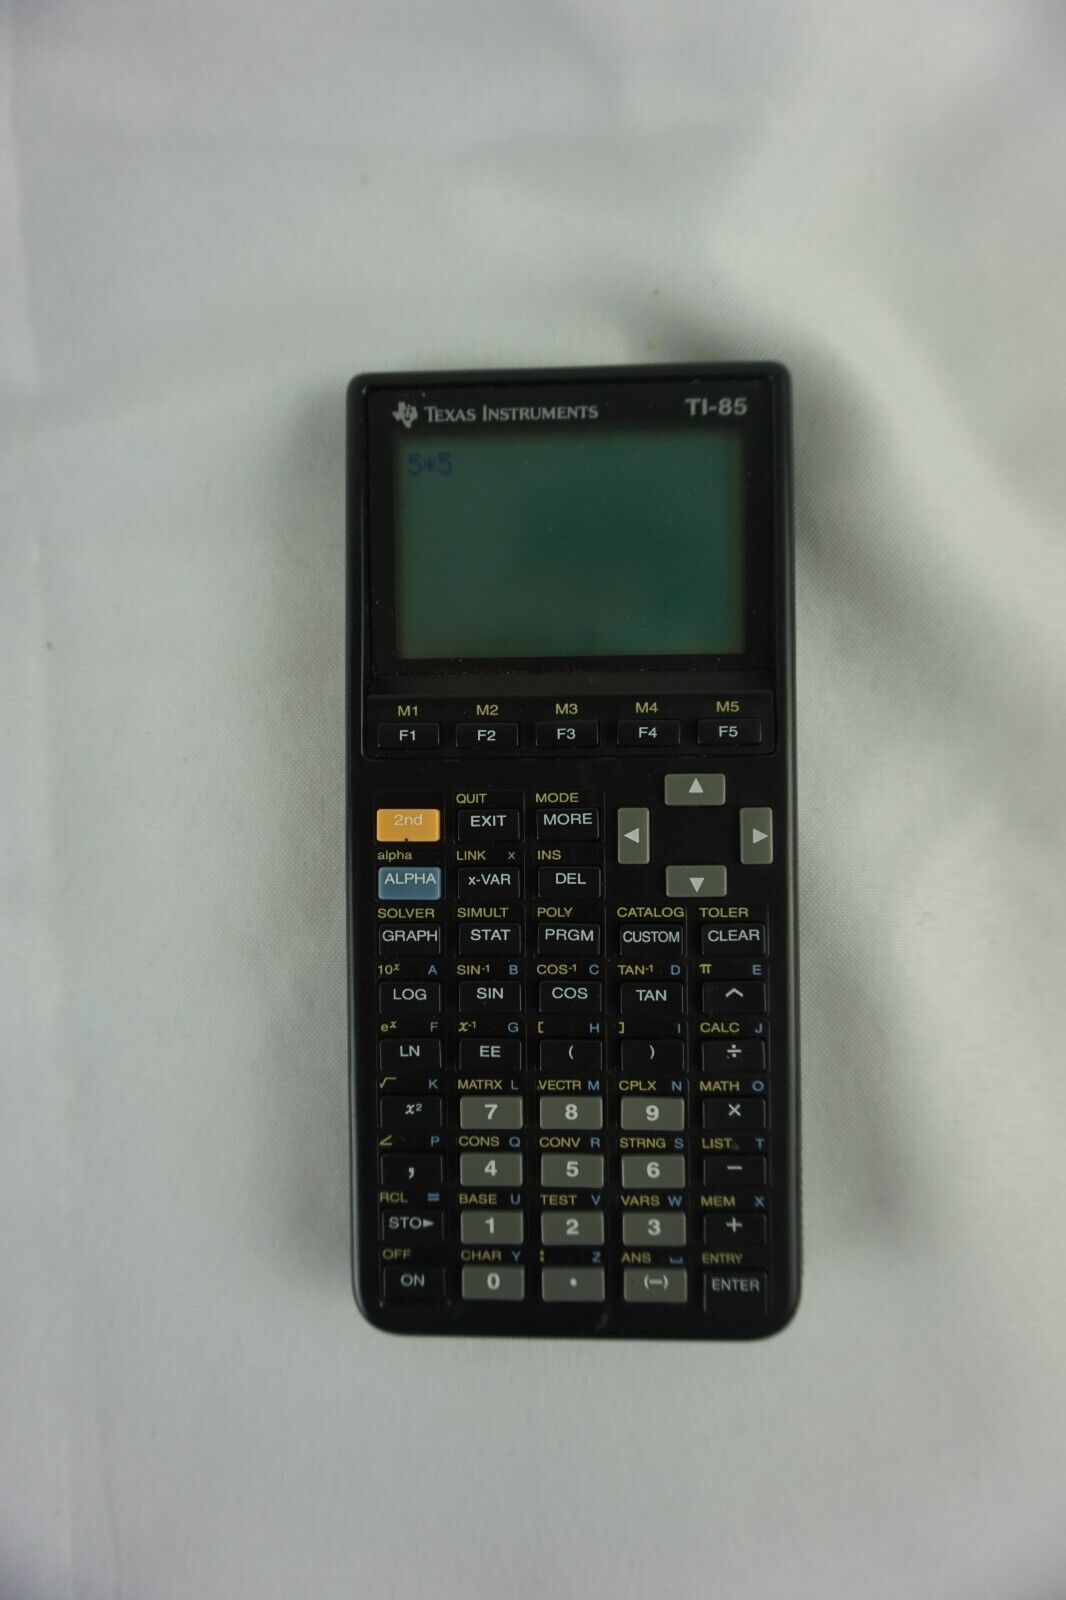 Texas Instruments TI-85 Graphing Calculator